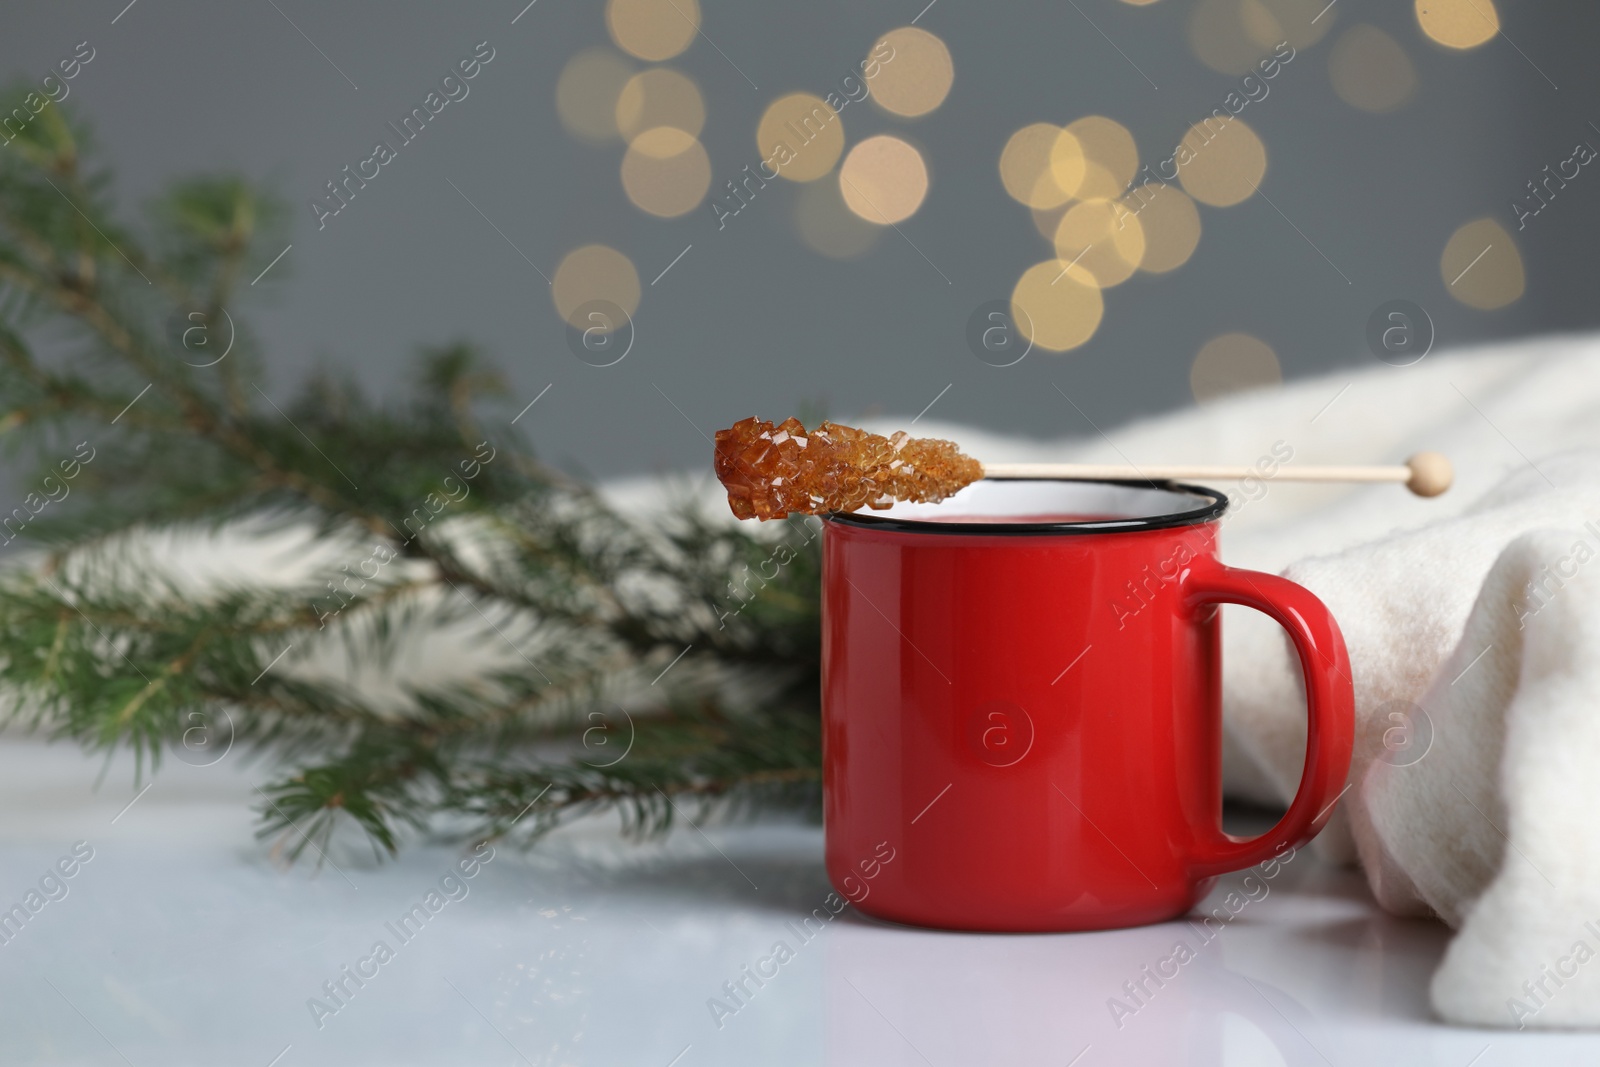 Photo of Stick with sugar crystals and cup of drink on white table against blurred festive lights, space for text